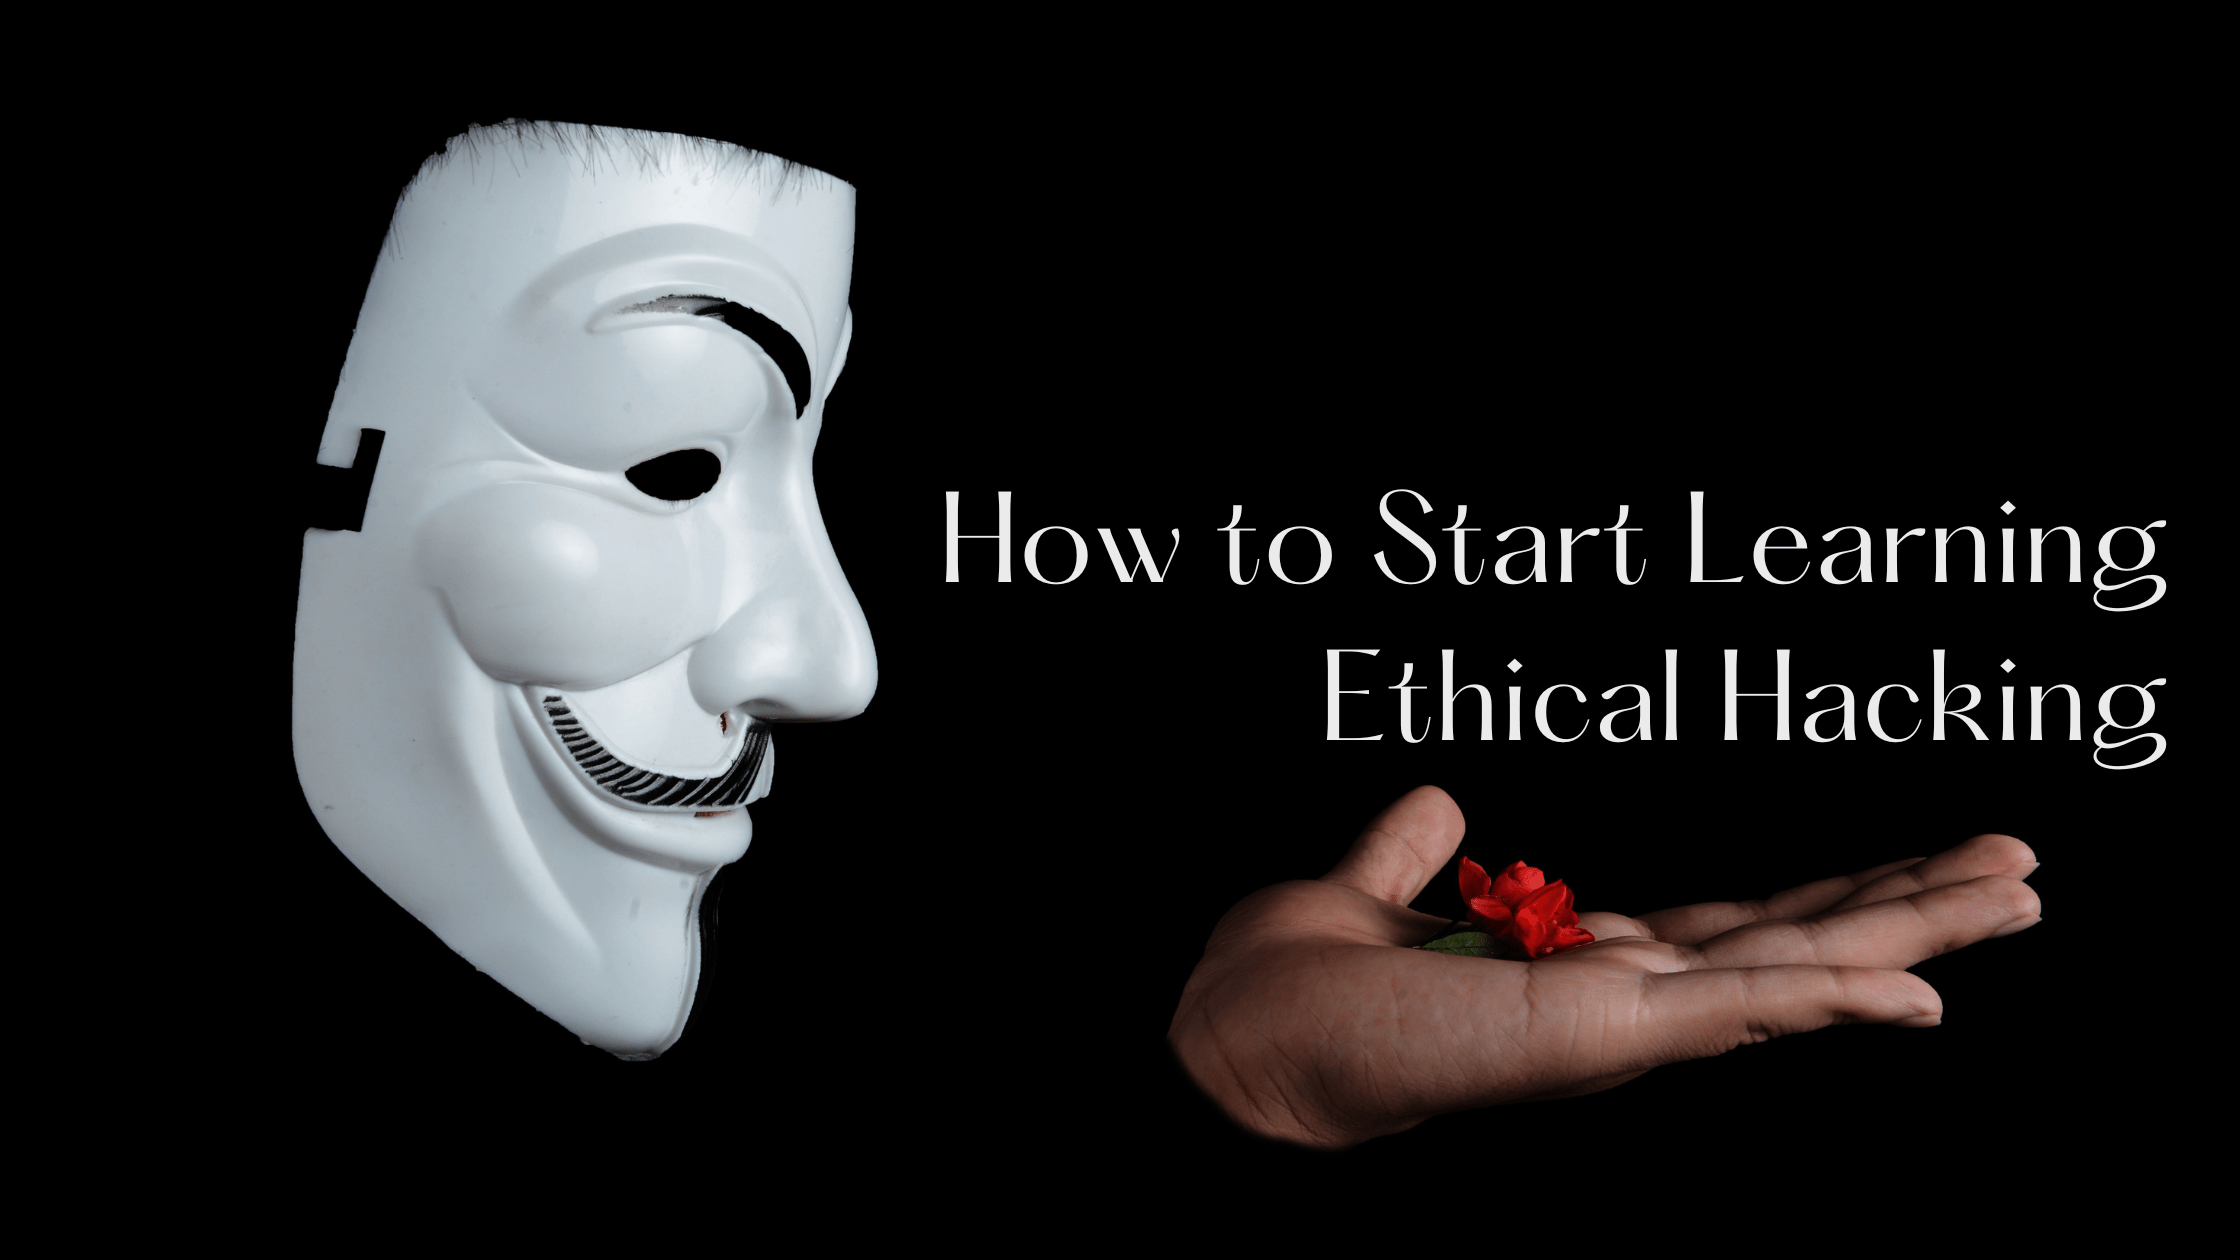 How to Start Learning Ethical Hacking – Hacking Beginners Guide